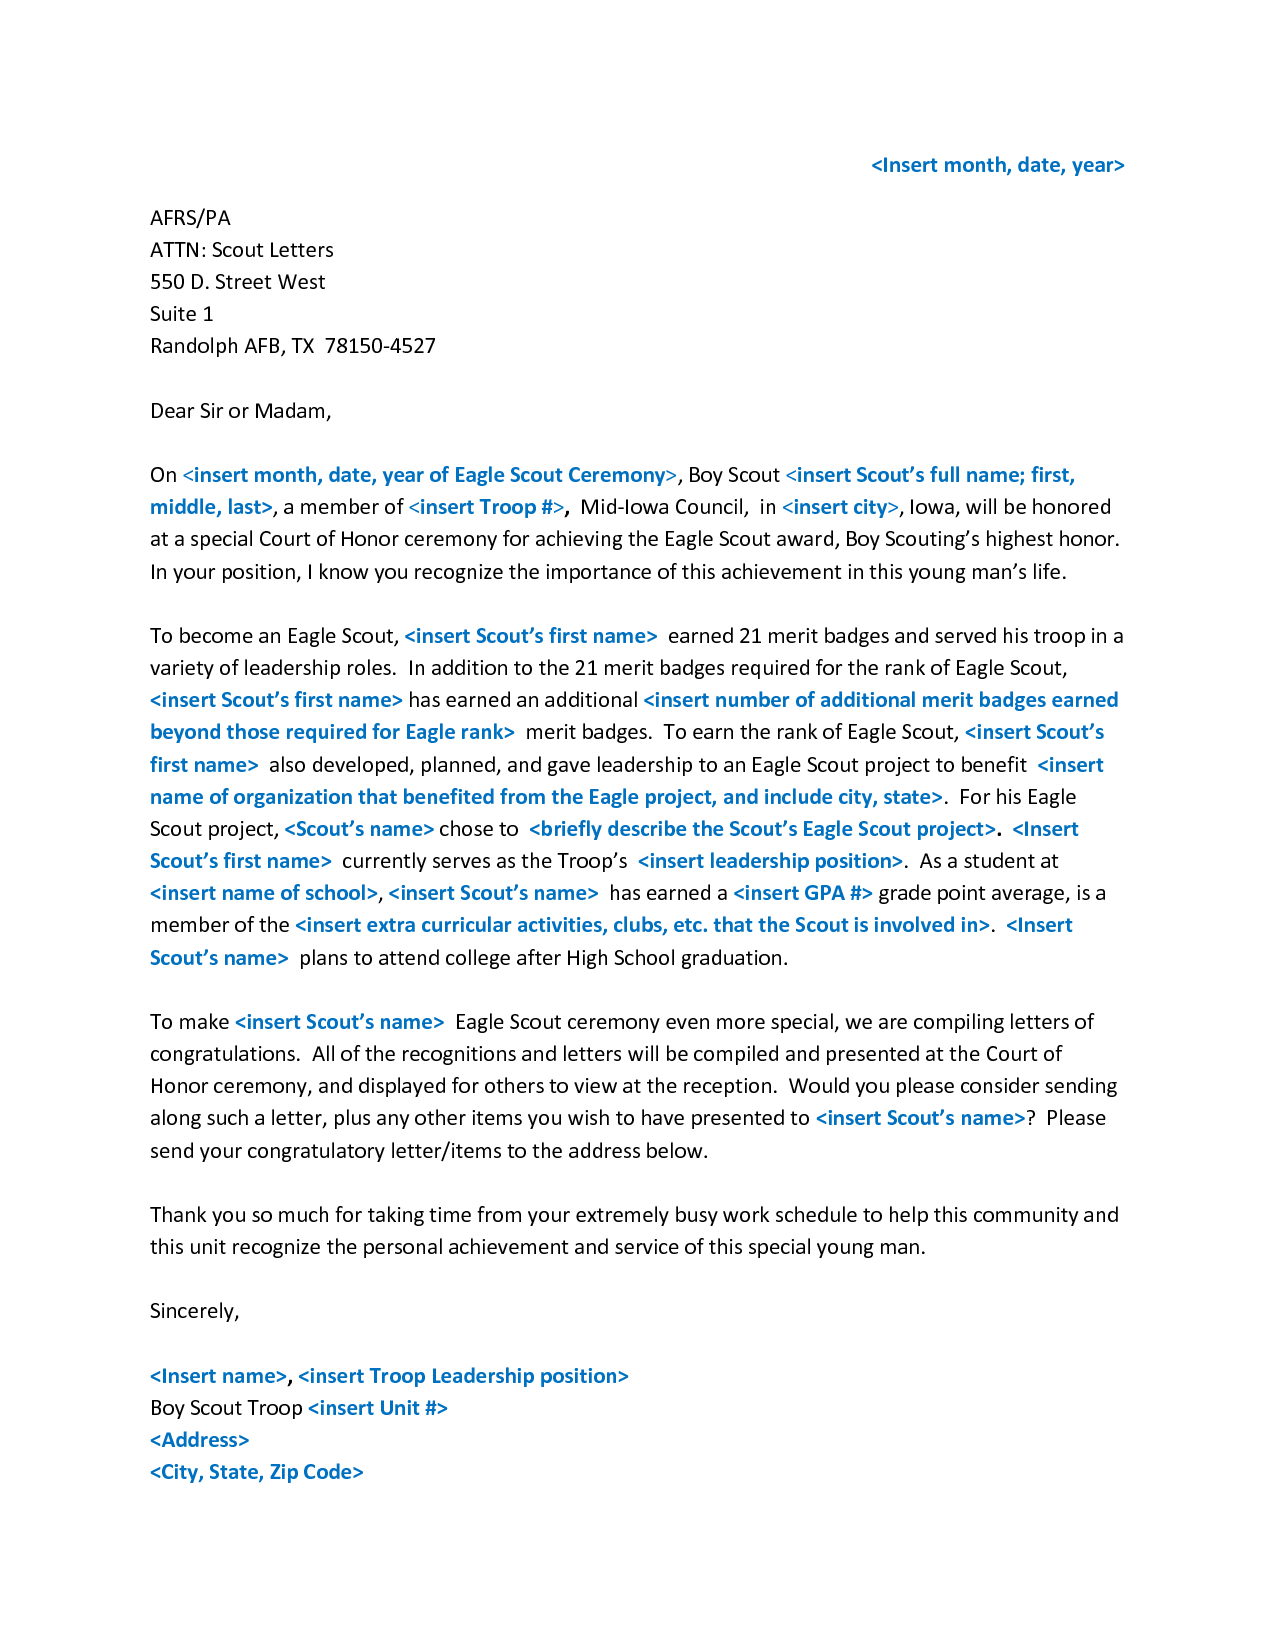 Eagle Scout Letter Of Recommendation Yahoo Image Search throughout sizing 1275 X 1650